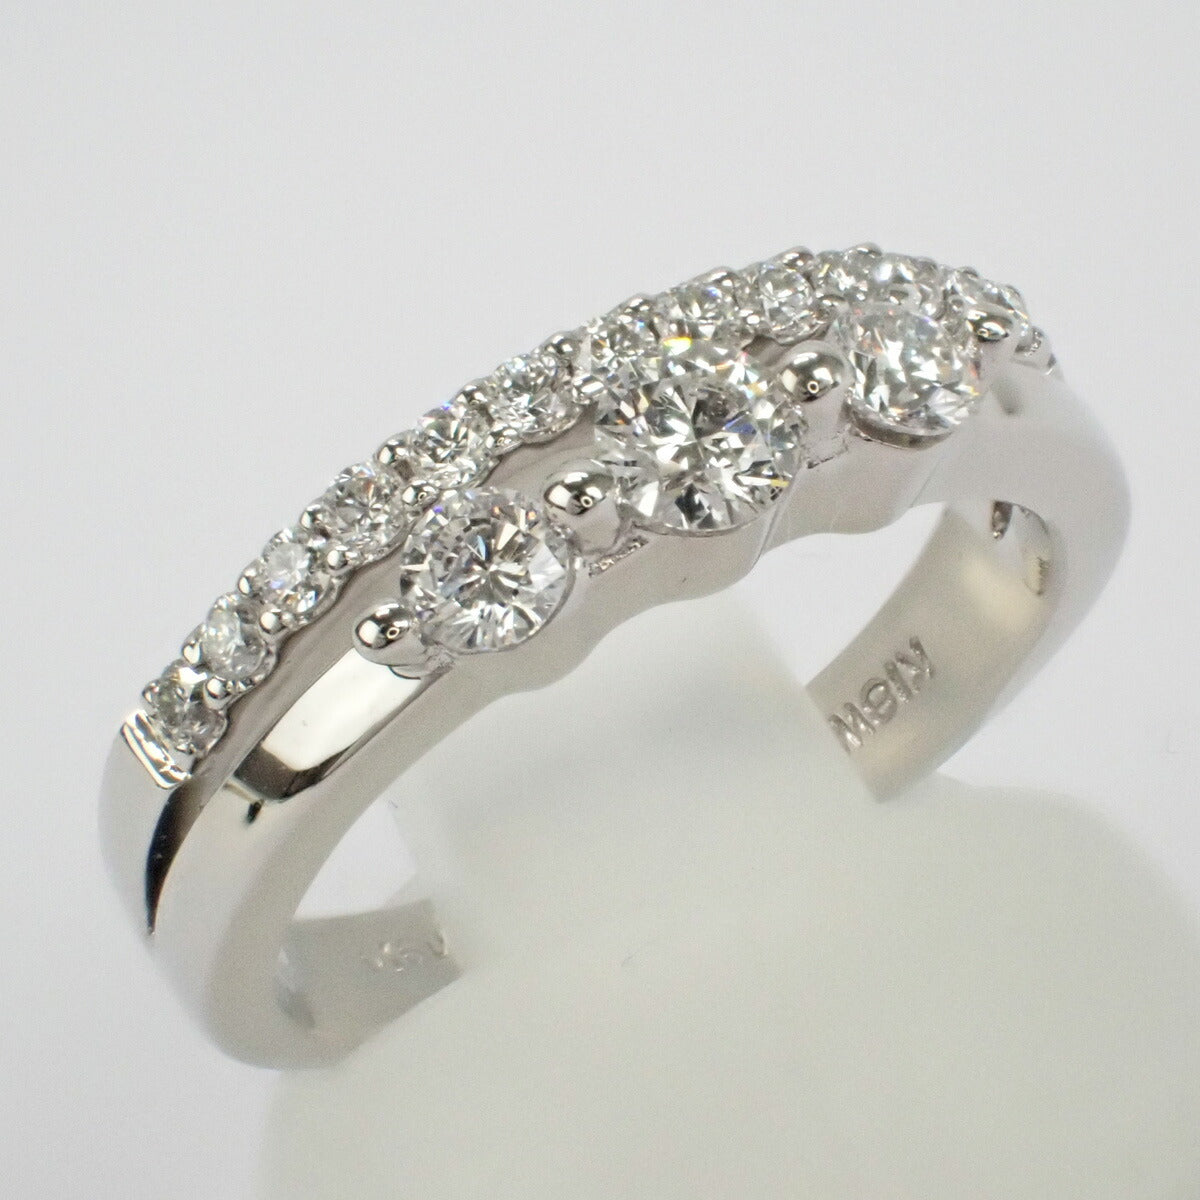 K18 White Gold Diamond 0.16ct and 0.43ct Designer Ring, Ladies' Size 11 – Pre-owned